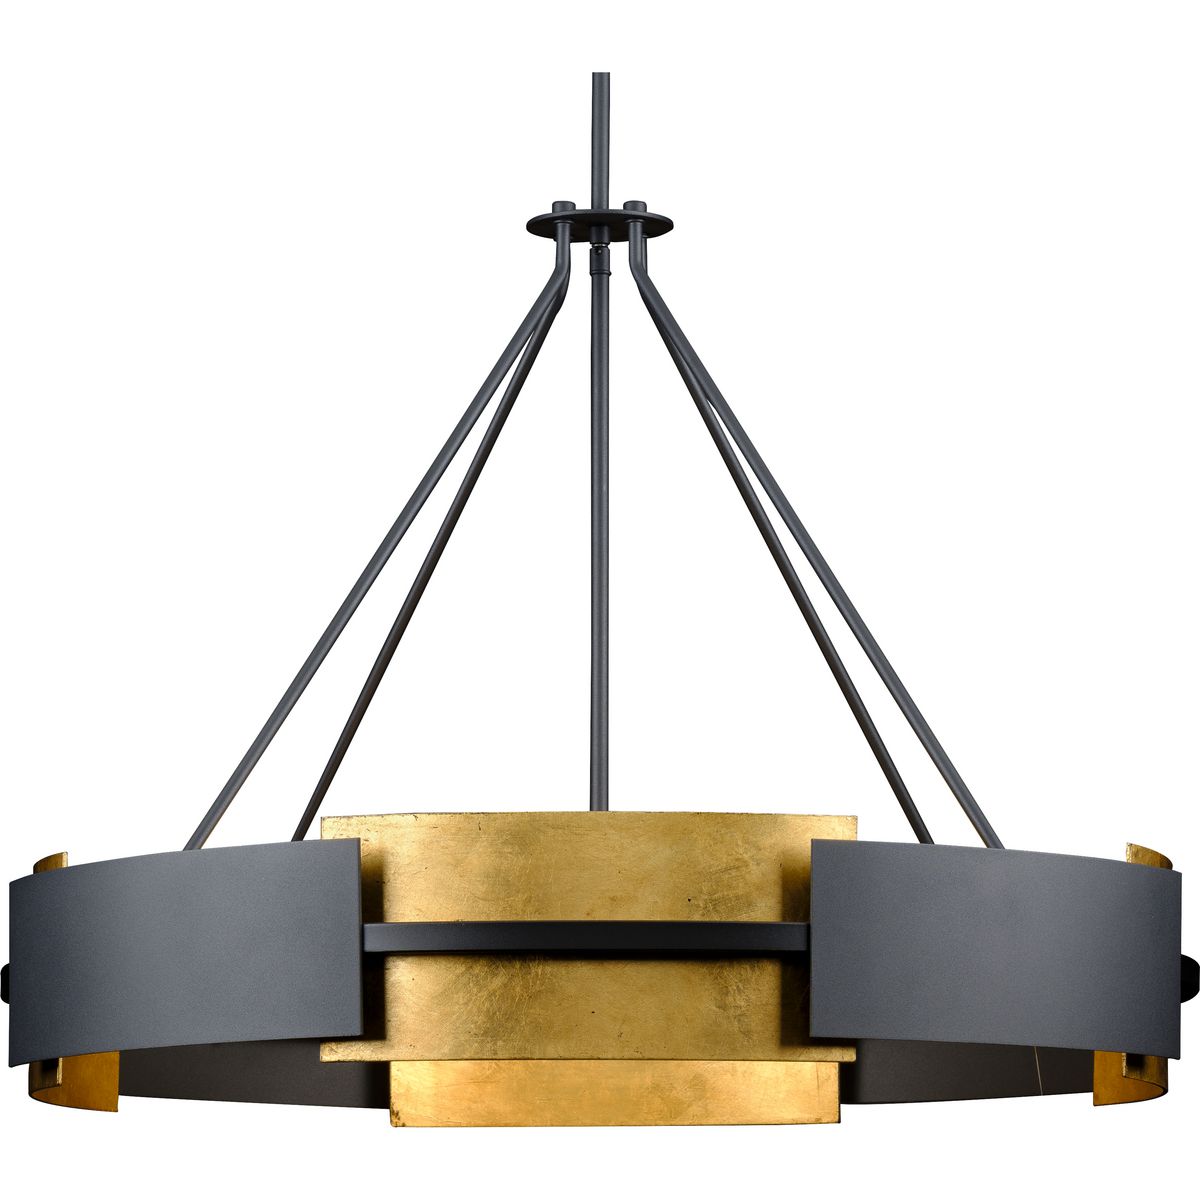 Lowery Collection Six-Light Textured Black Industrial Luxe Hanging Pendant Light with Distressed Gold Leaf Accent - Dry Location Listed